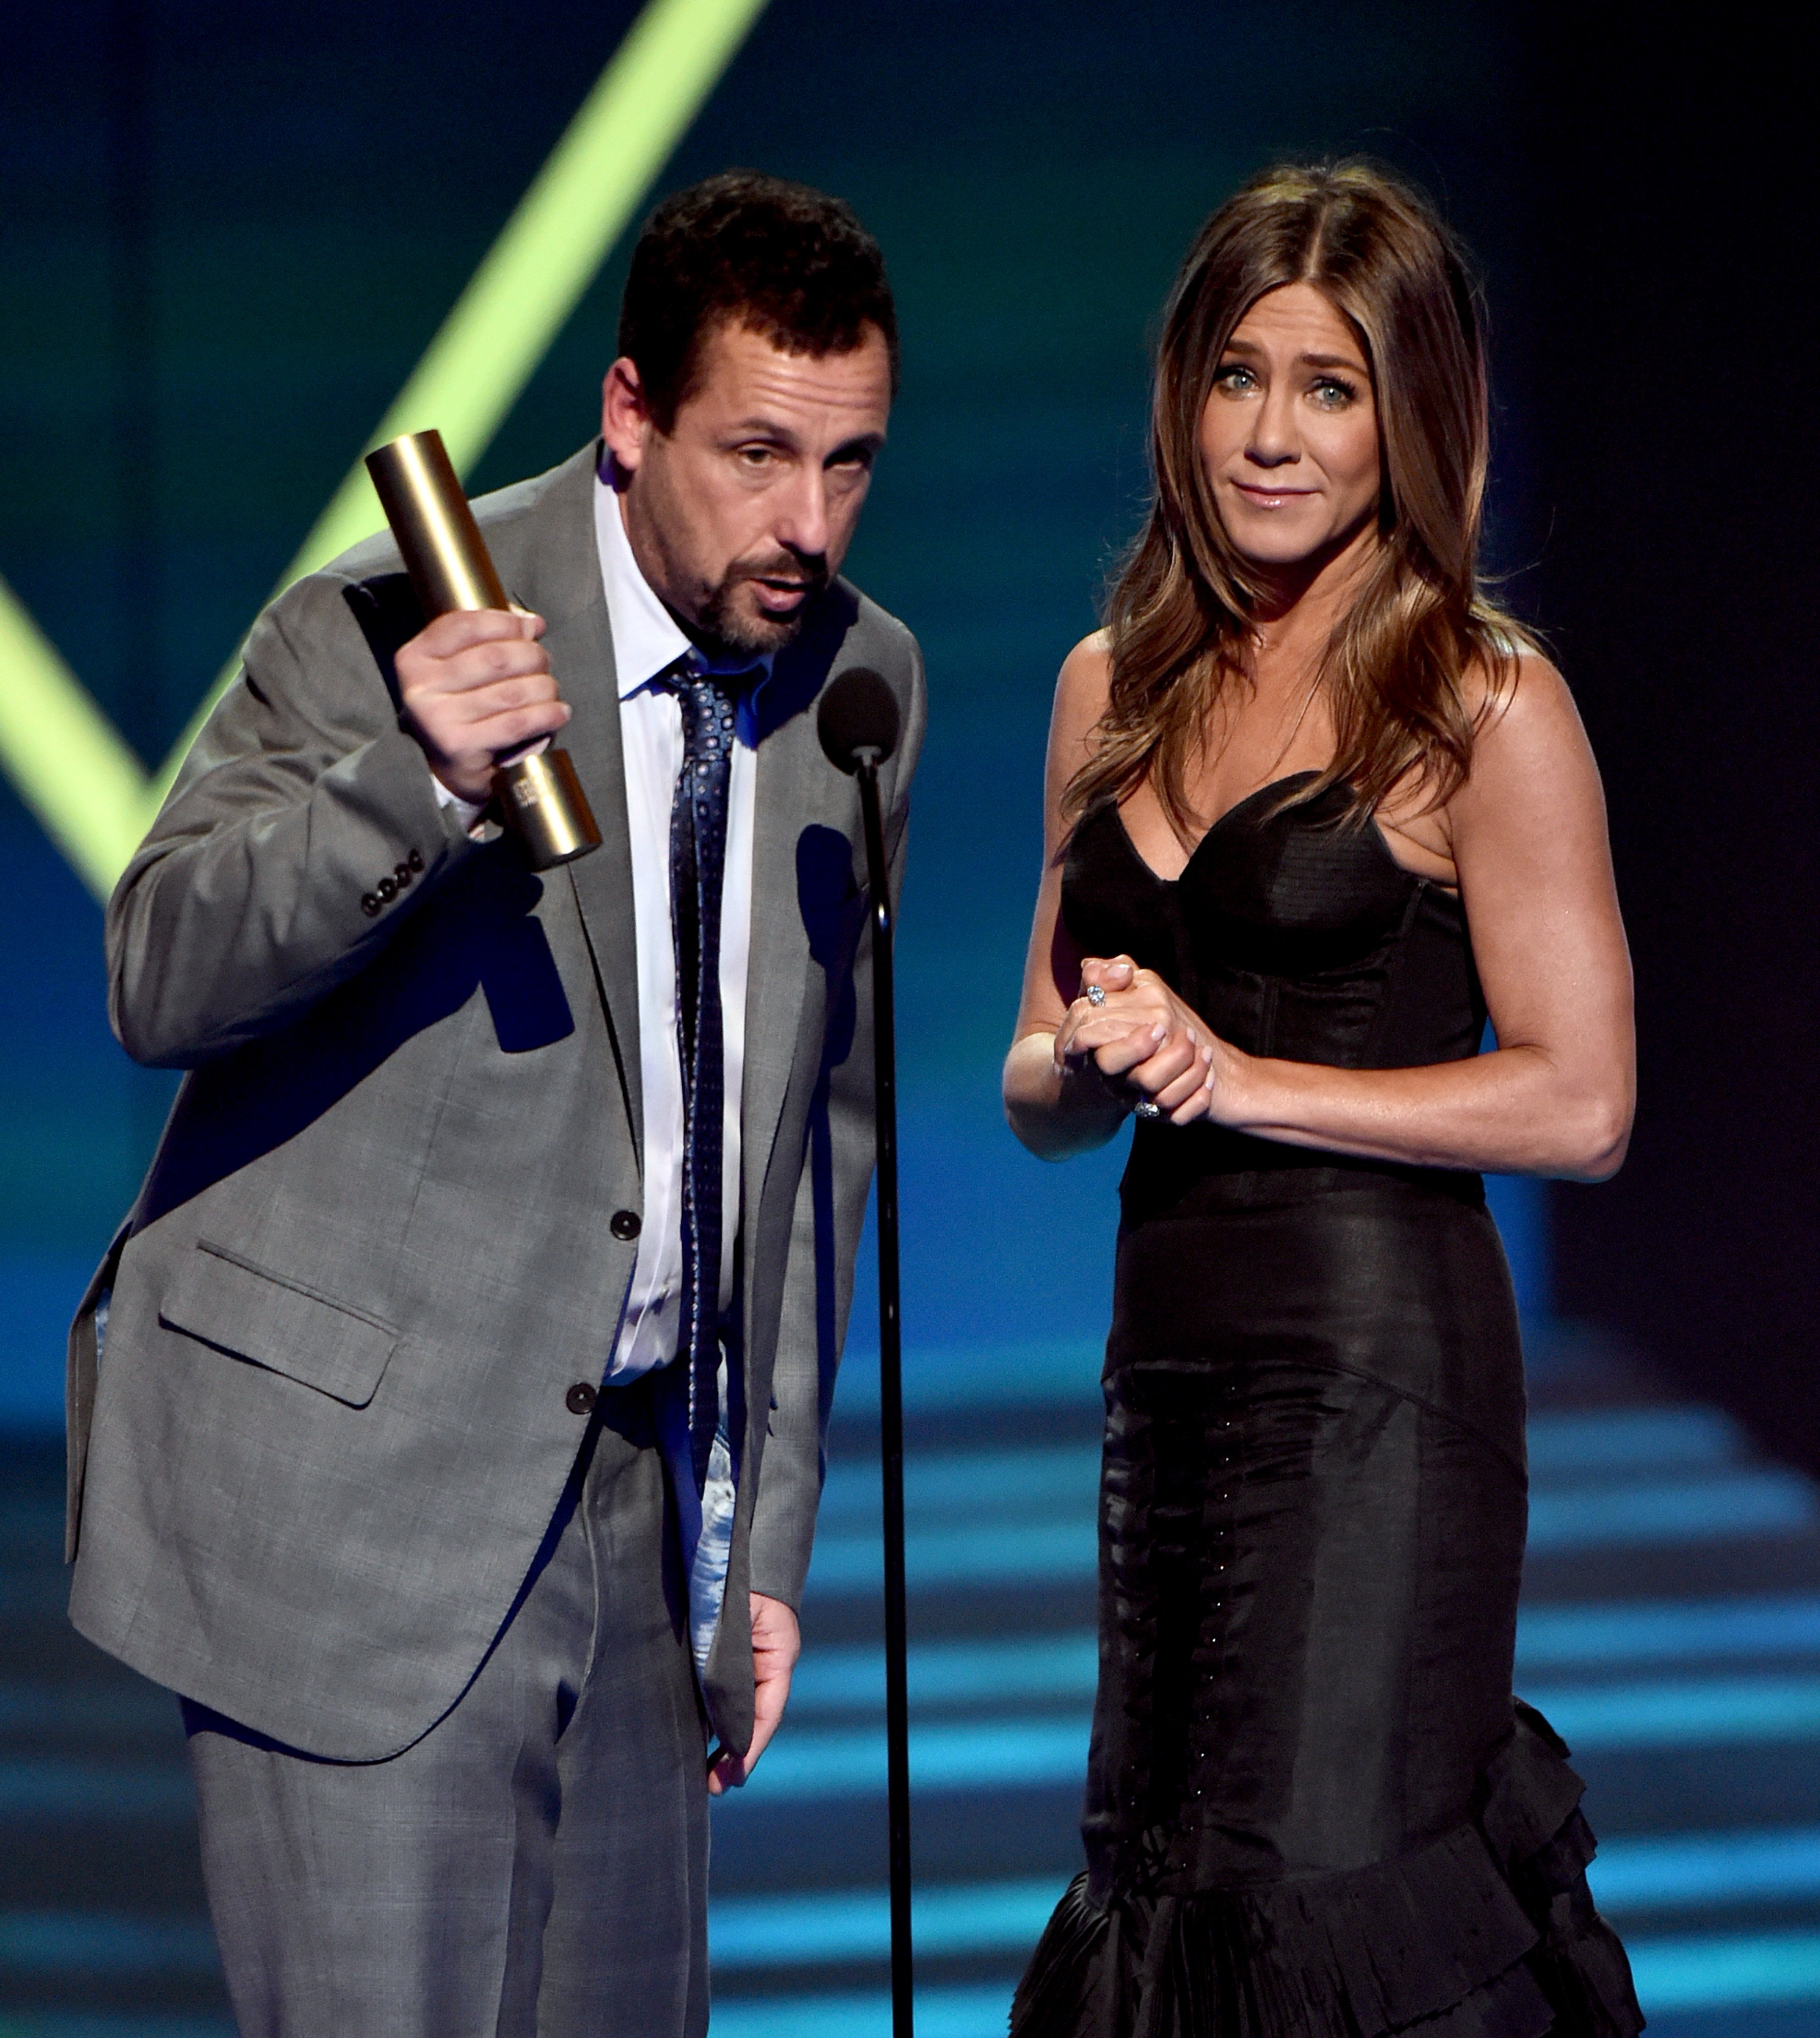 Adam Sandler and Jennifer Aniston accept the Comedy Movie of 2019 Award at the E! People's Choice Awards, 2019 | Photo: Getty Images 